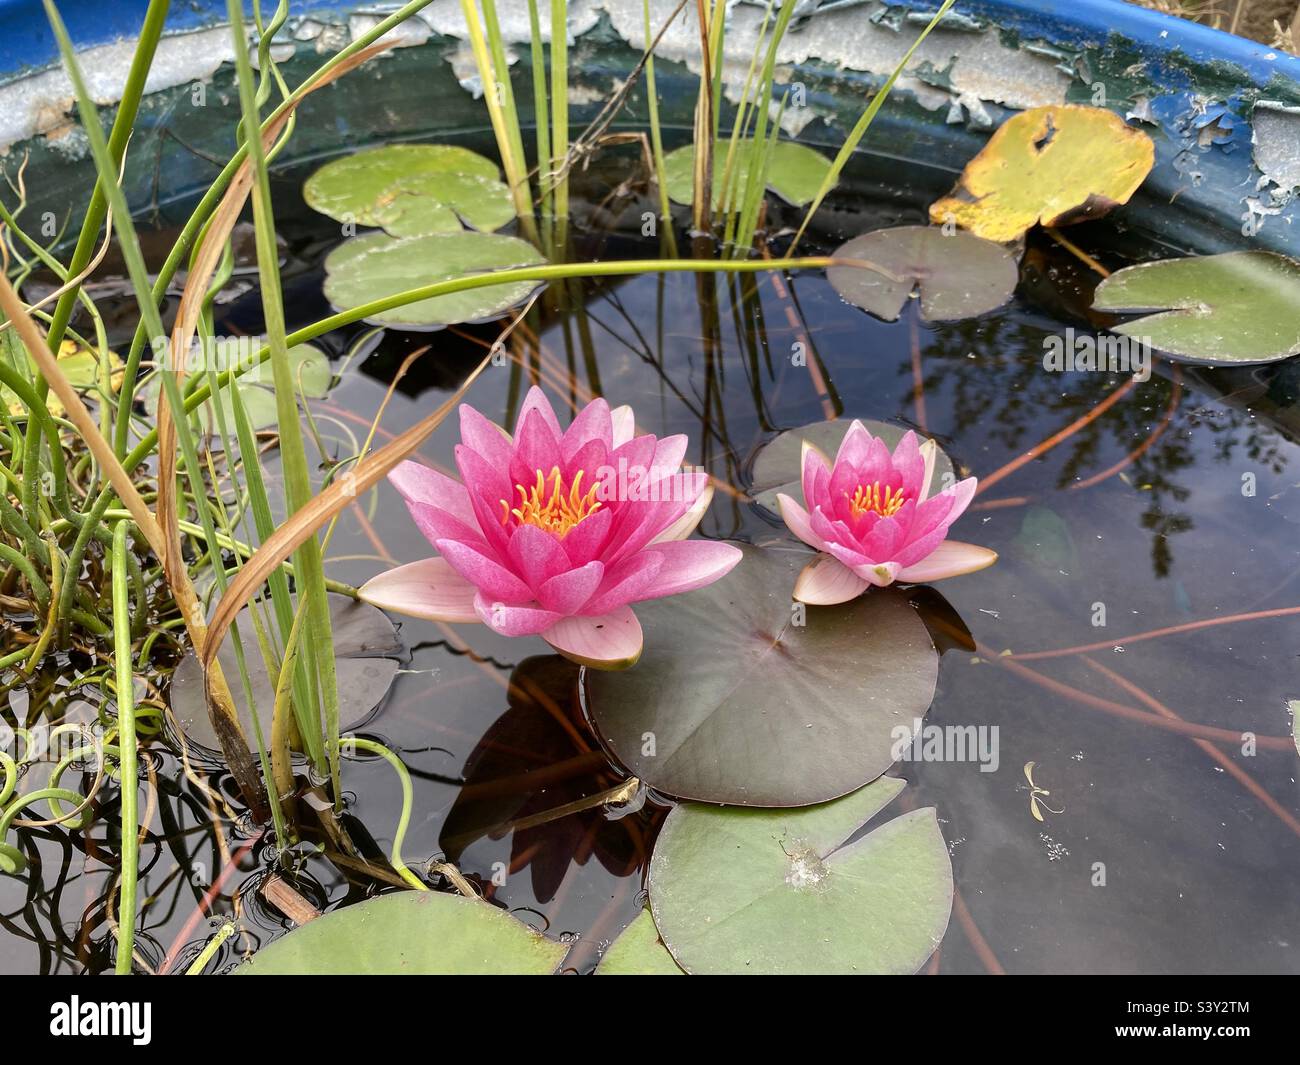 Two pink searoses in water pond garden Stock Photo